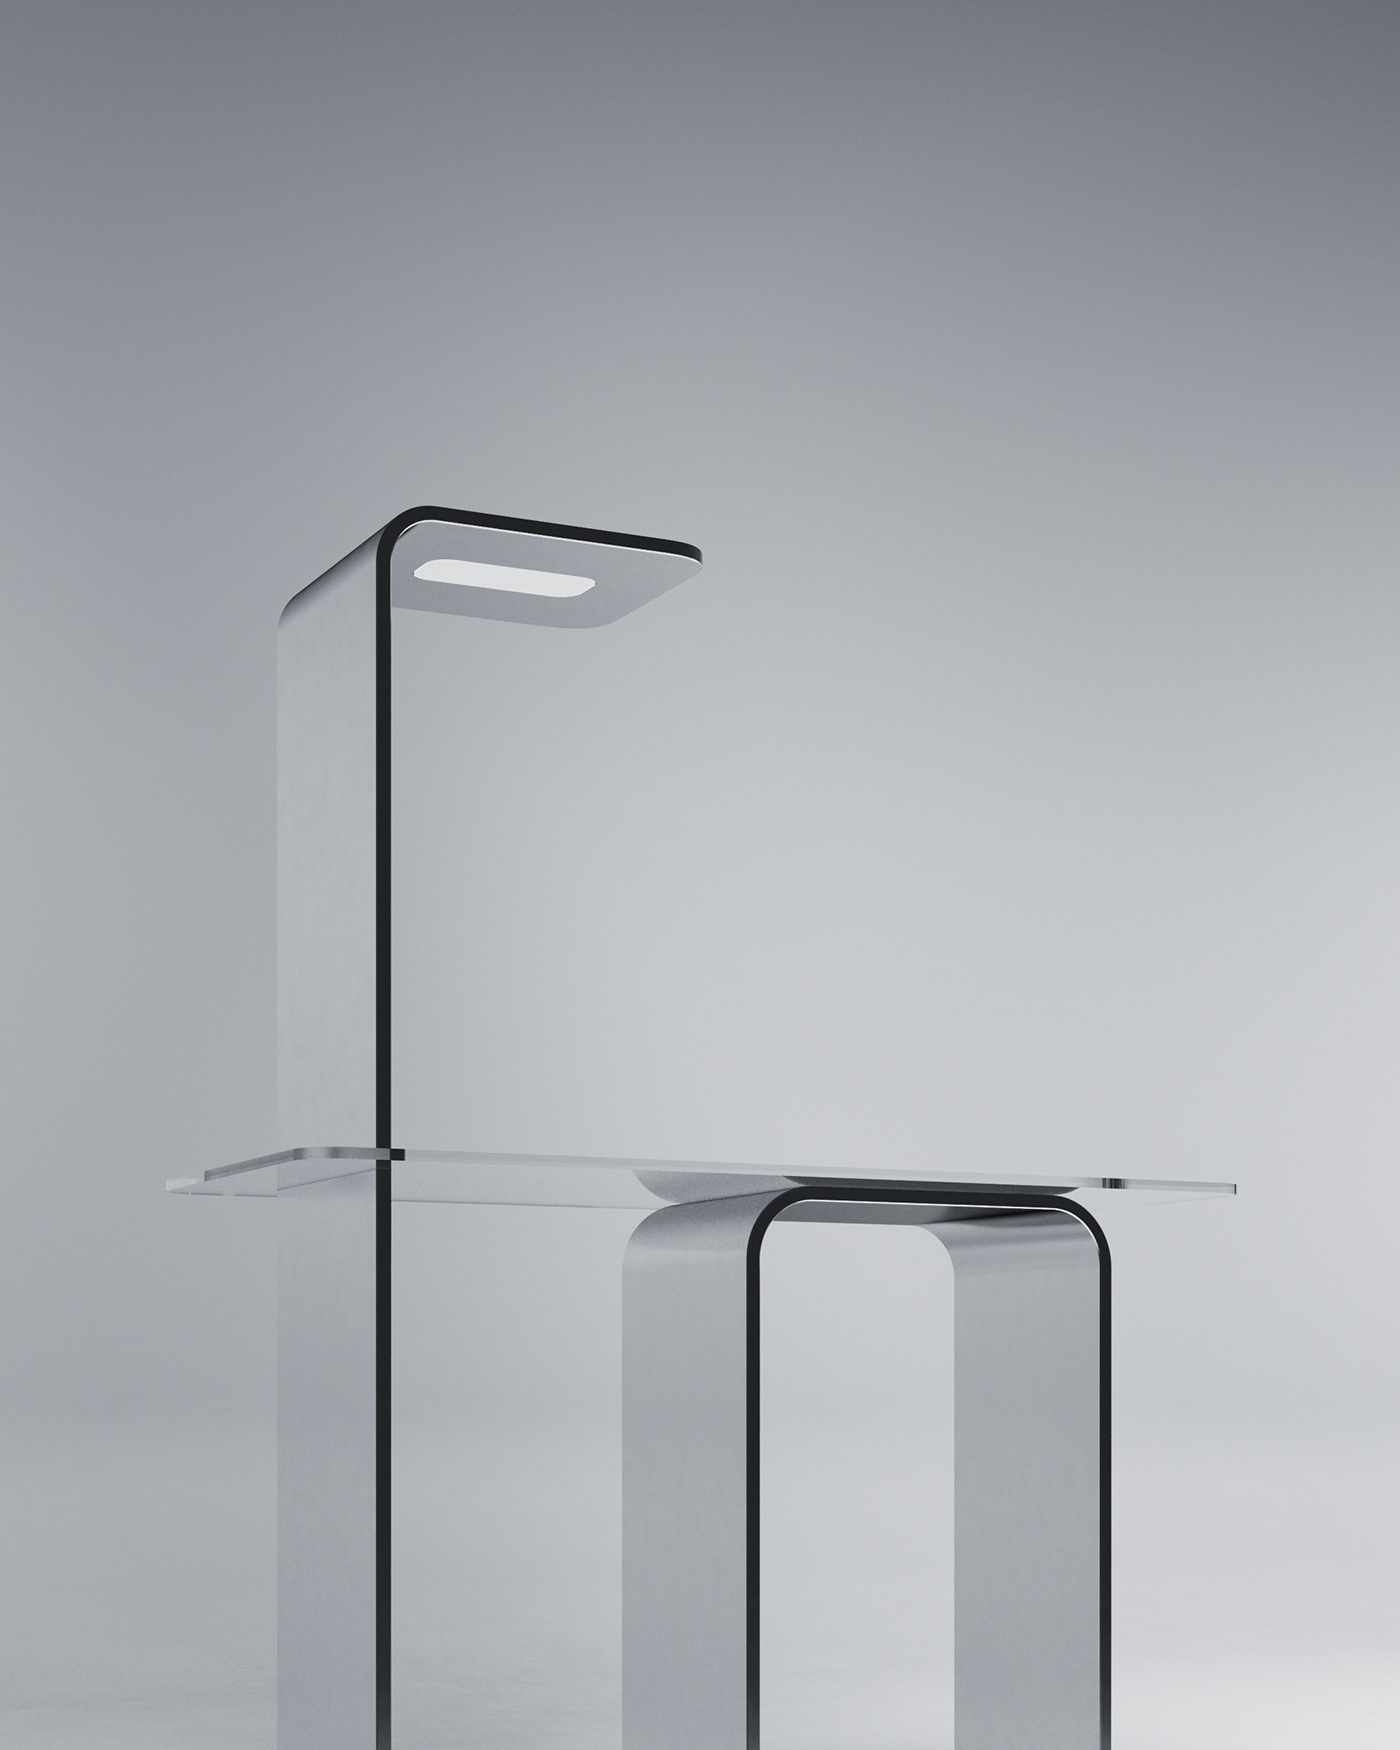 concept furniture glass metal product table clean furniture design  minimal product design 